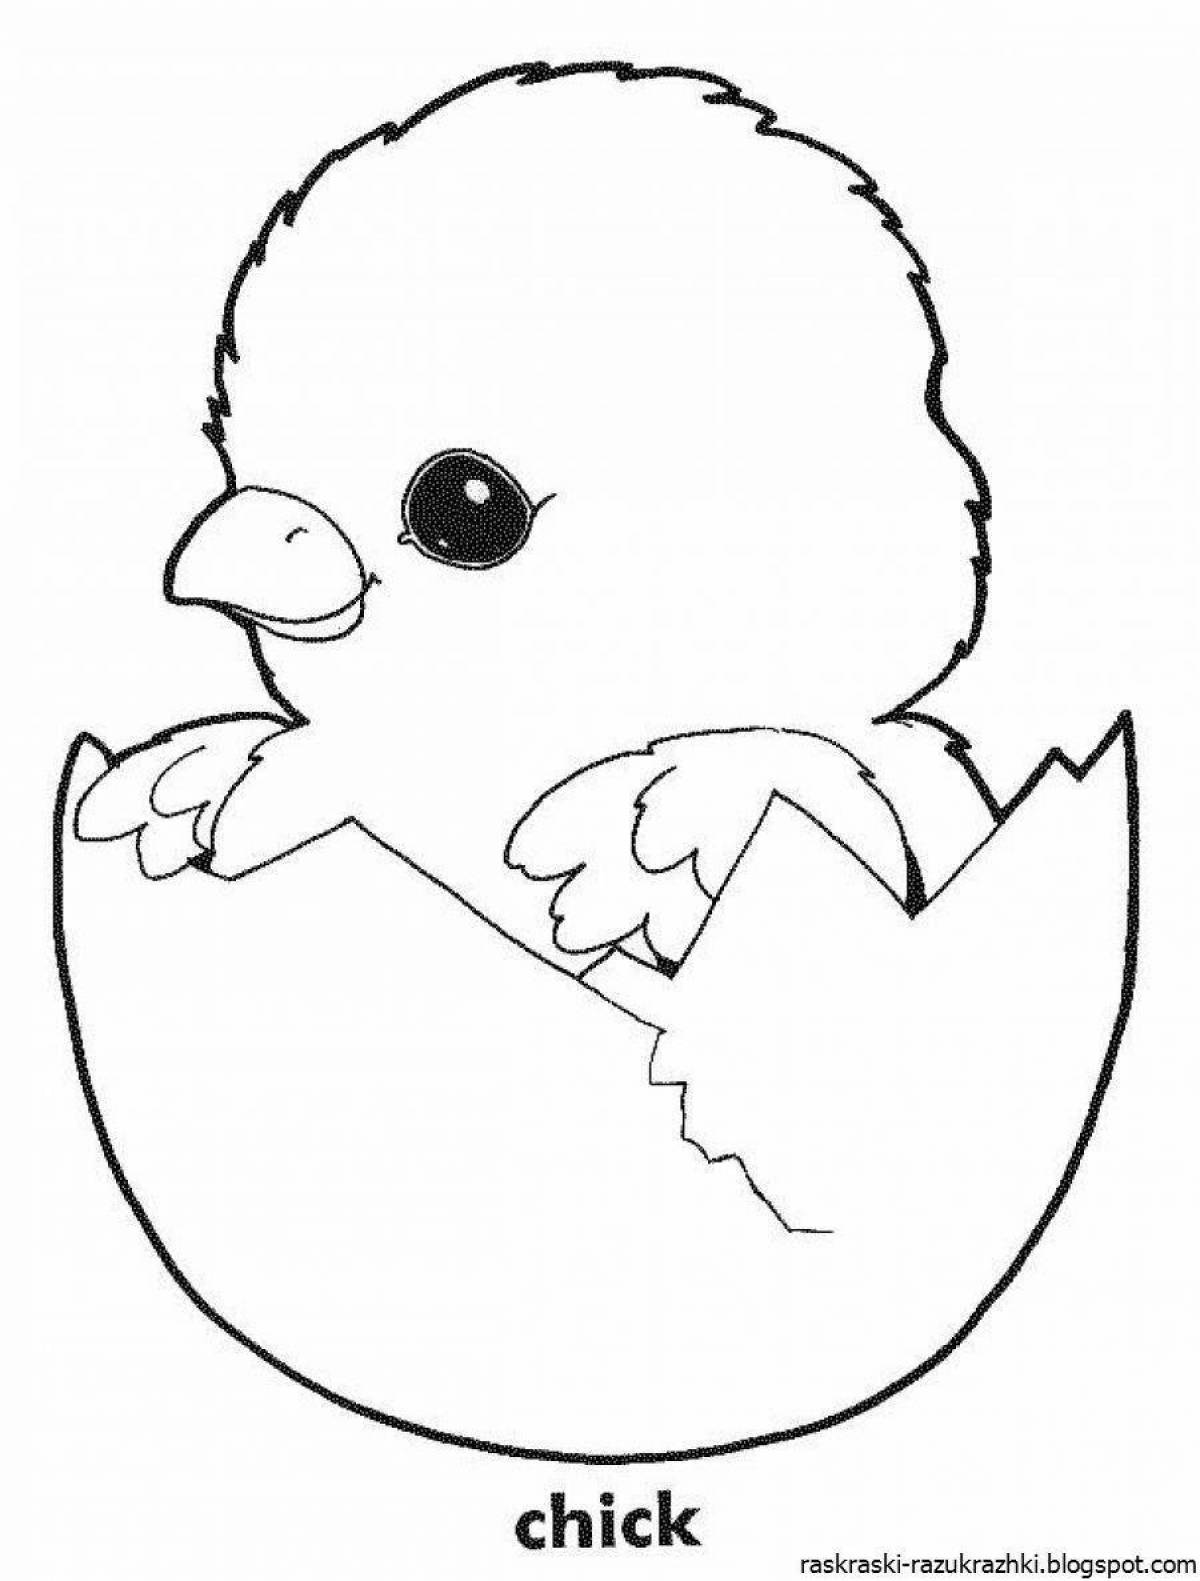 Coloring page shining chick in egg